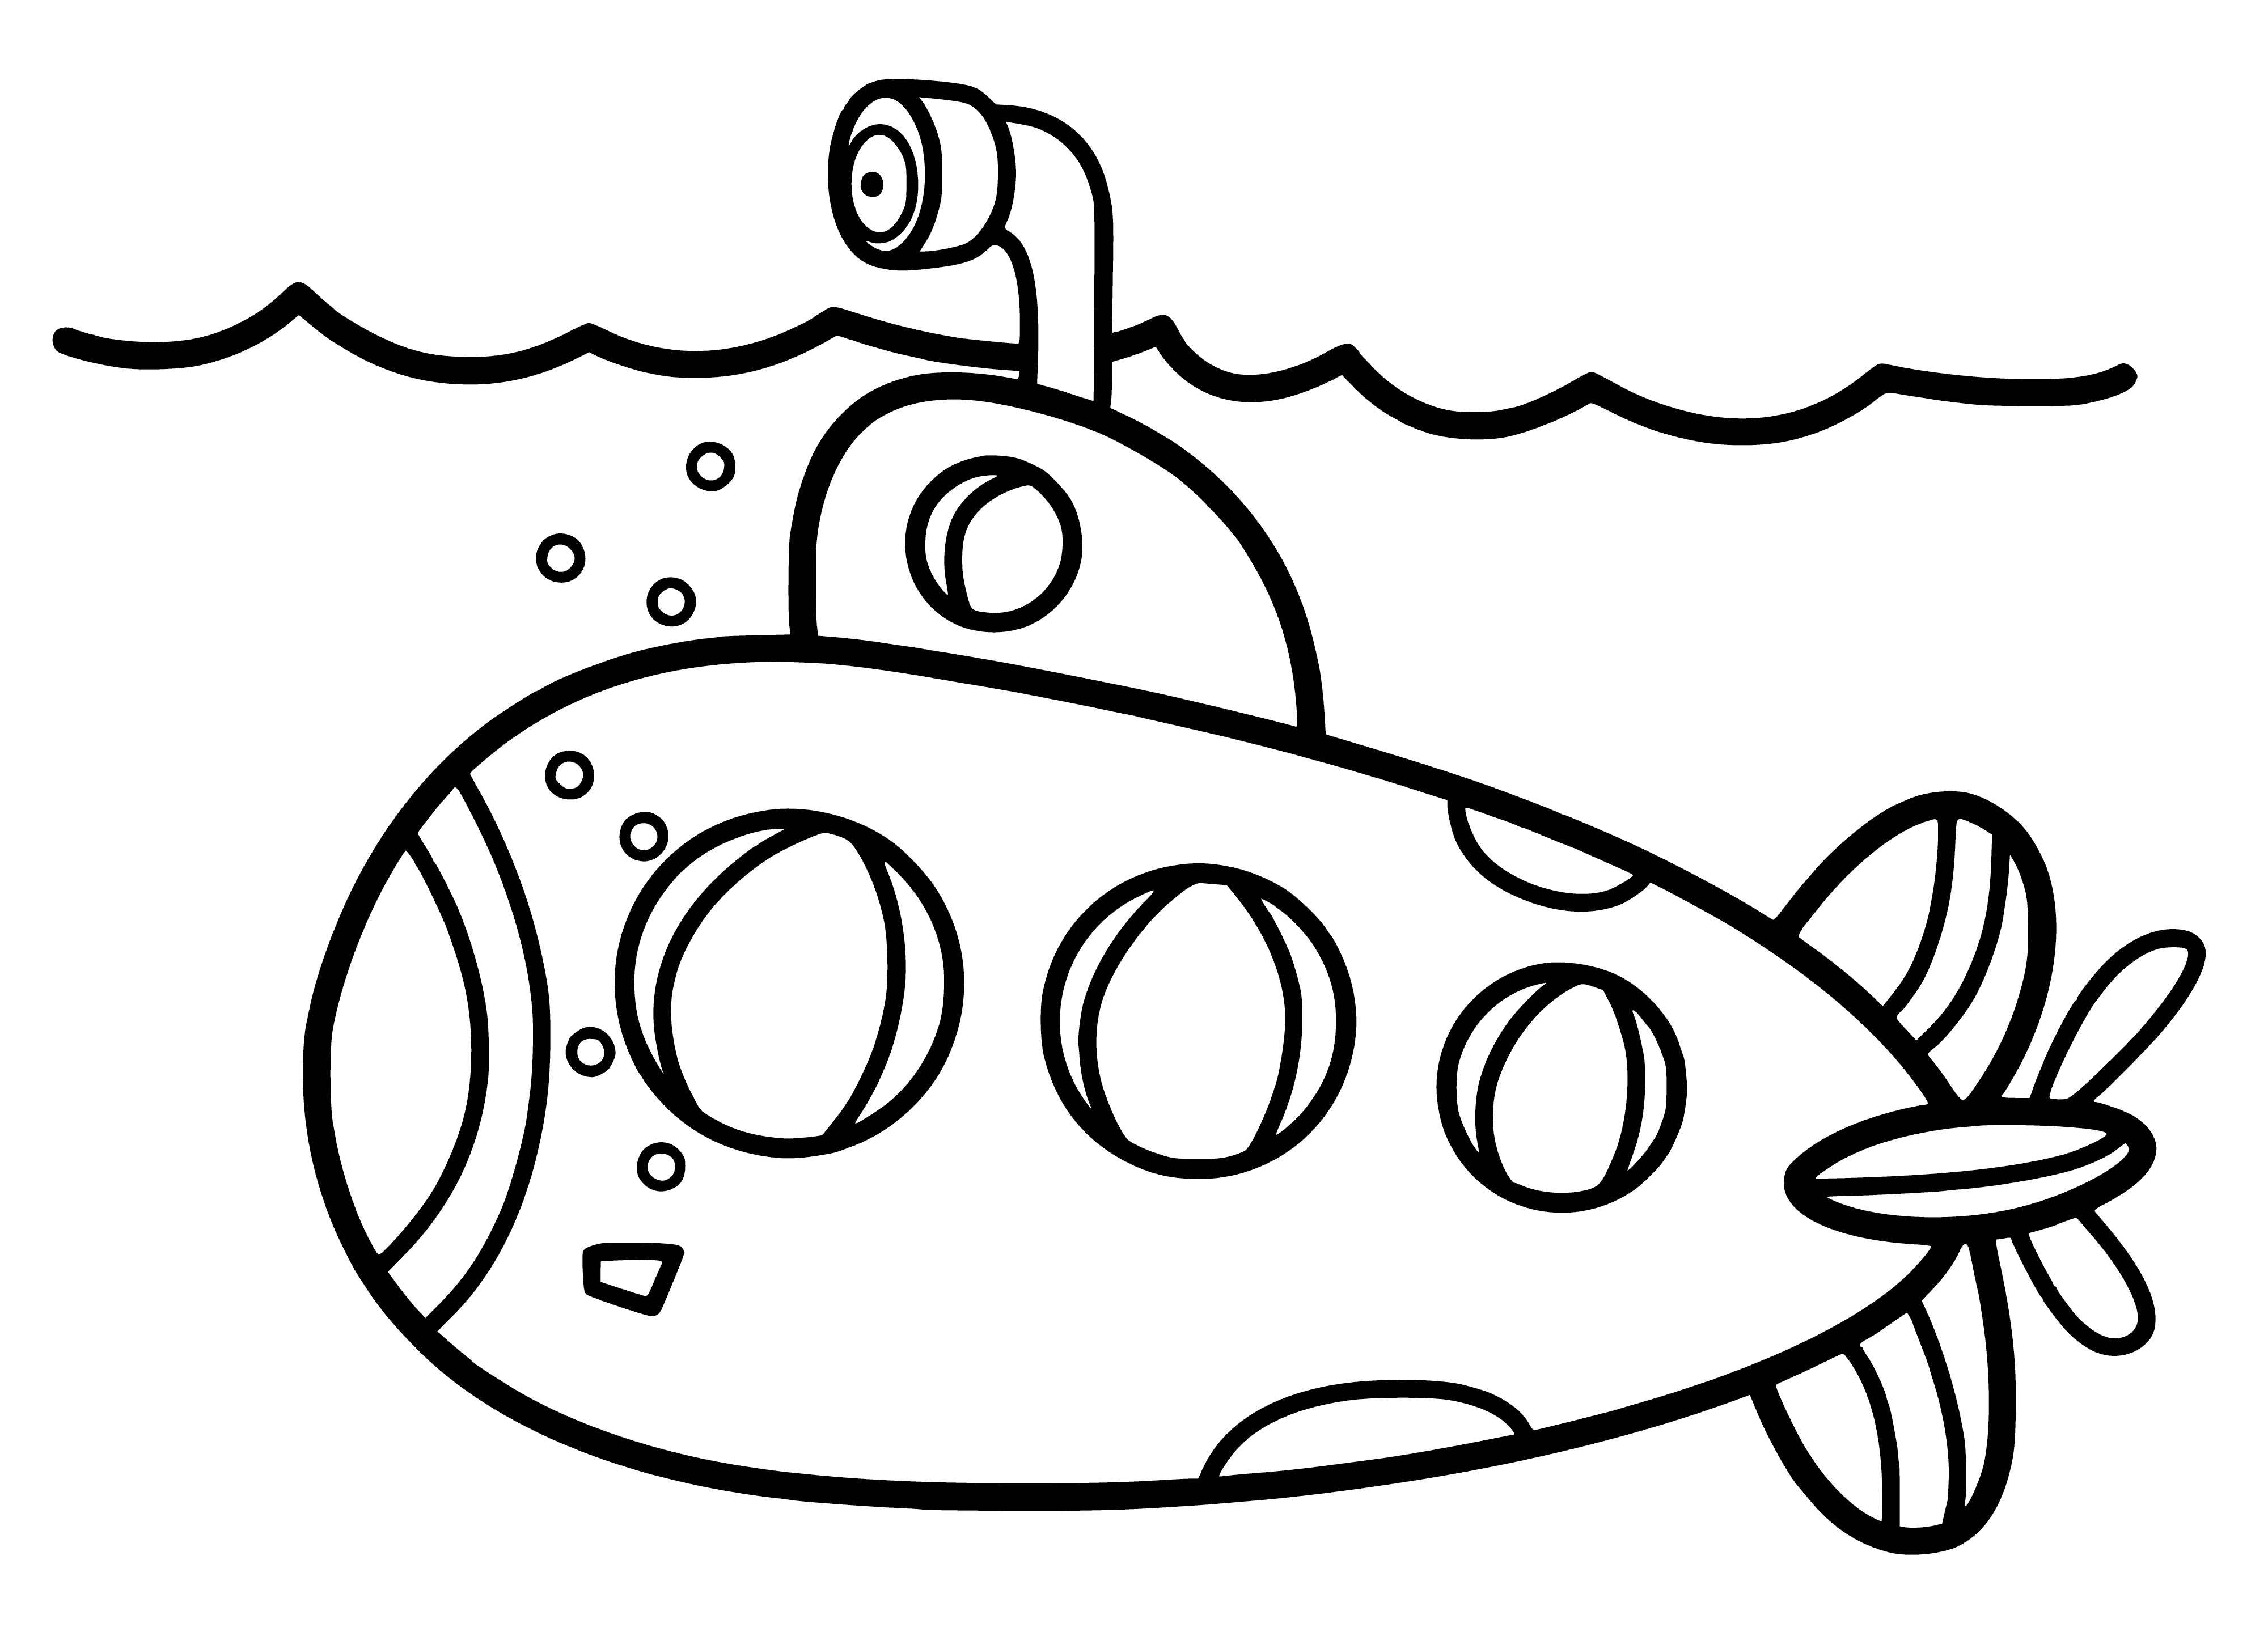 coloring page: Submarine coloring pages perfect for kids who love exploring the ocean! Fish, submarines, & seas await! #coloring #ocean #submarine